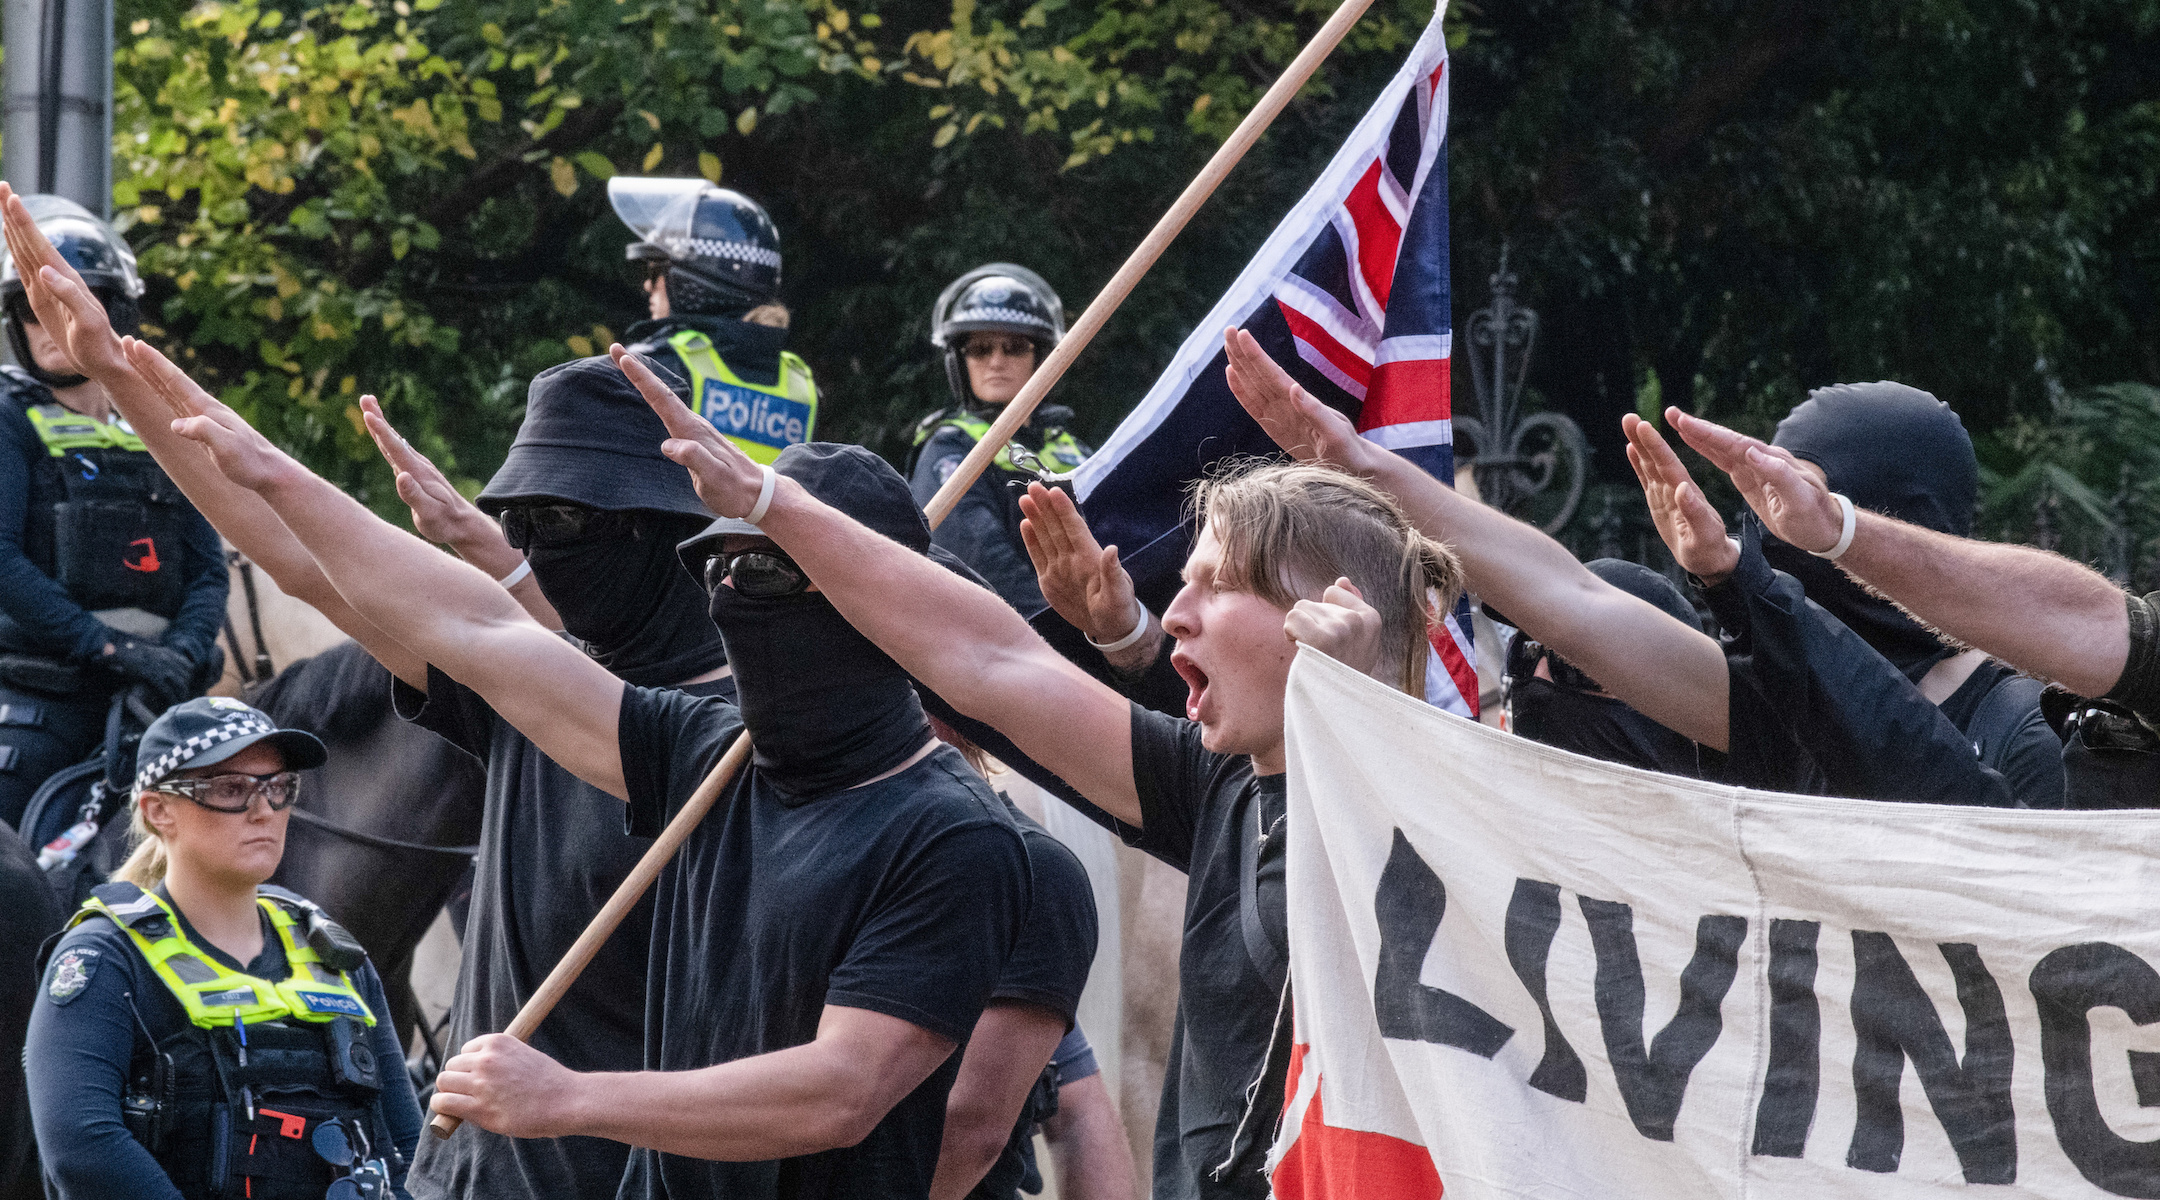 Neo-Nazi protesters make a Nazi salute at a protest in Melbourne, May 13, 2023. (Michael Currie/SOPA Images/LightRocket via Getty Images)